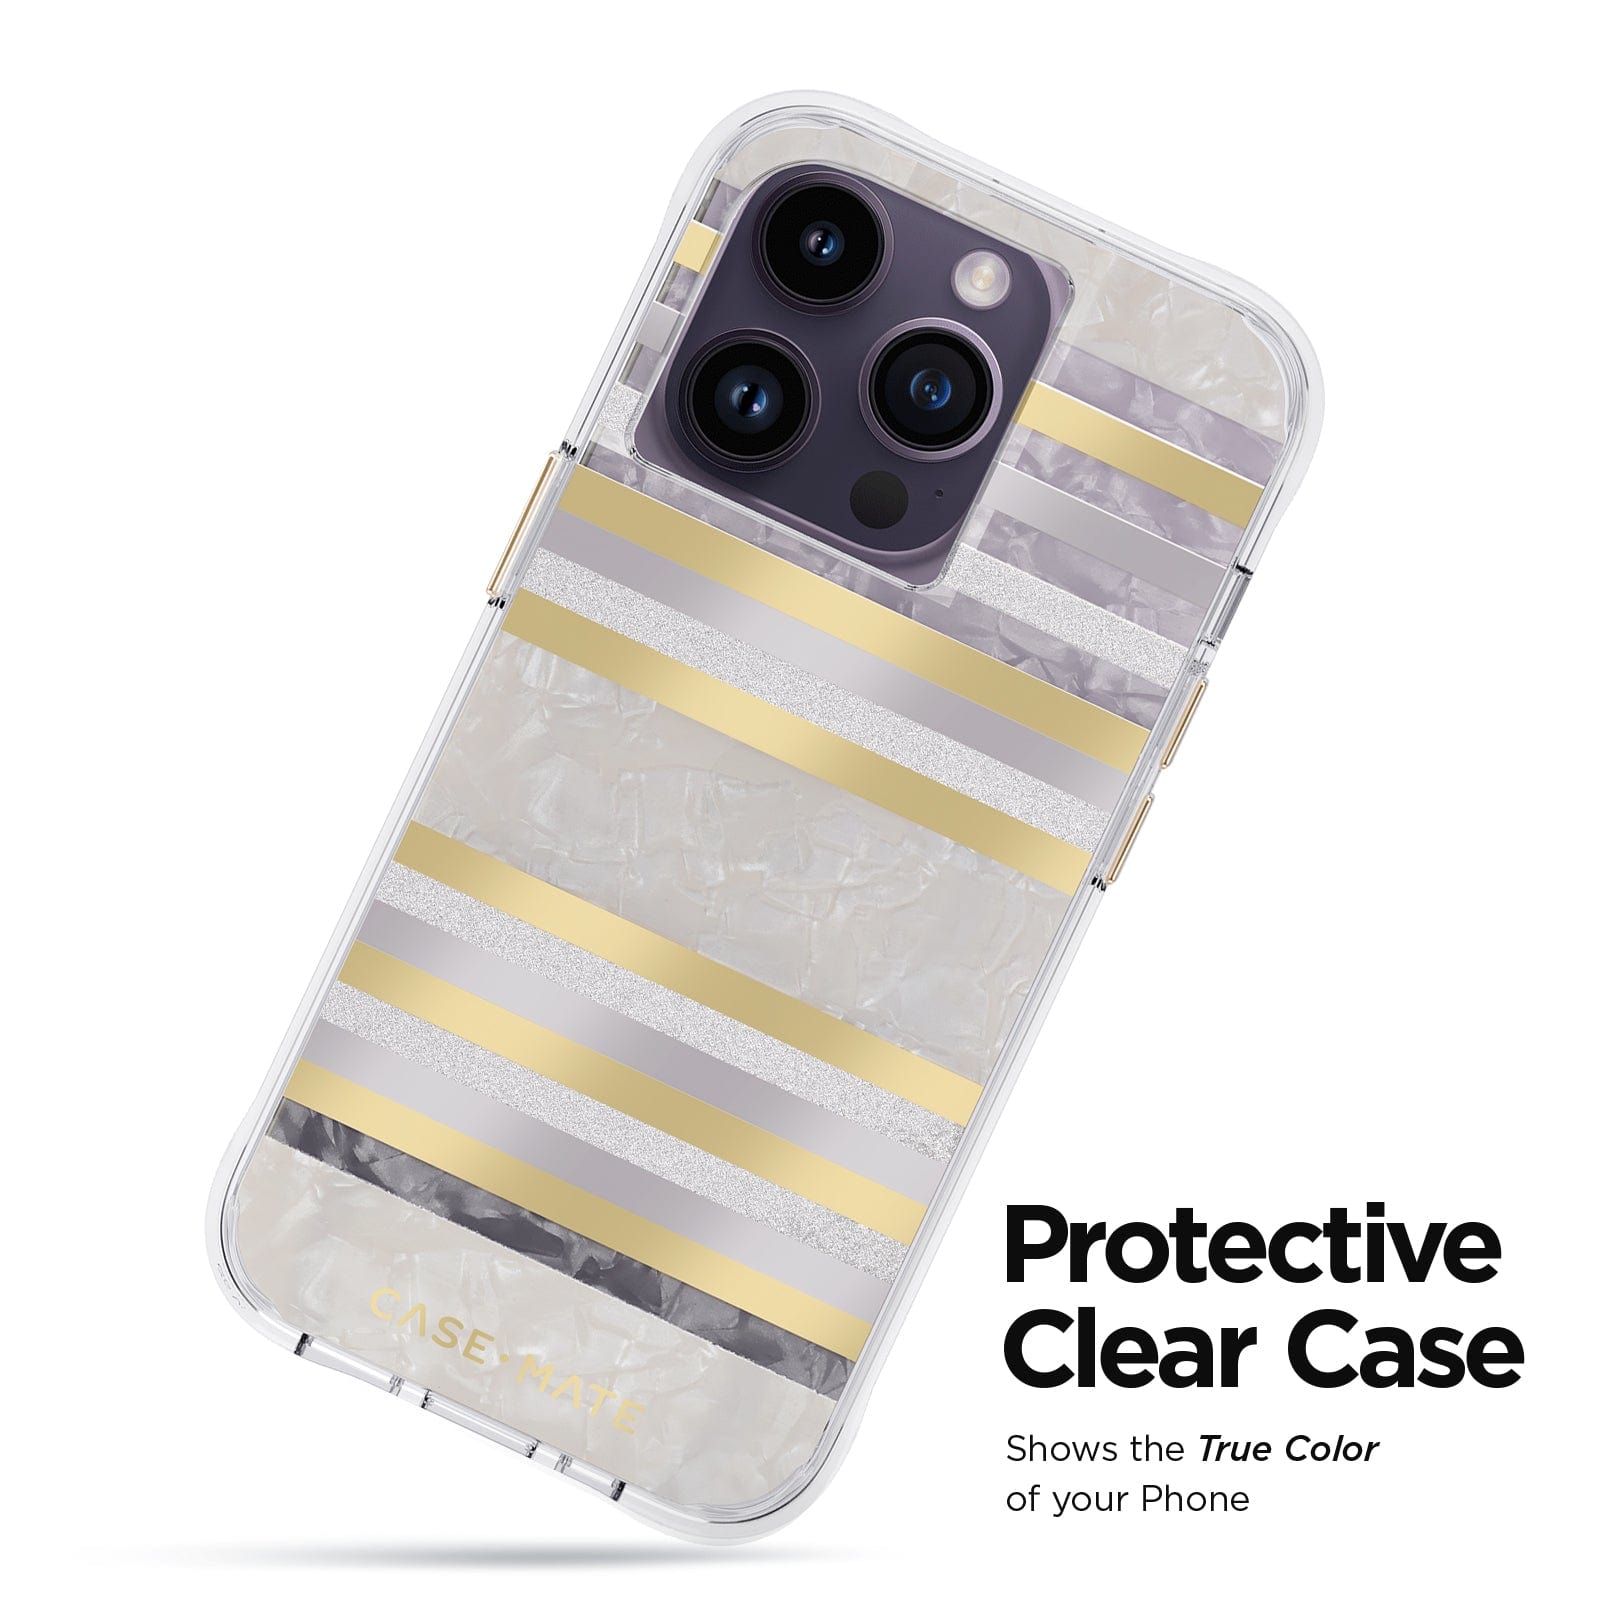 PROTECTIVE CLEAR CASE. SHOWS THE TRUE COLOR OF YOUR CASE.